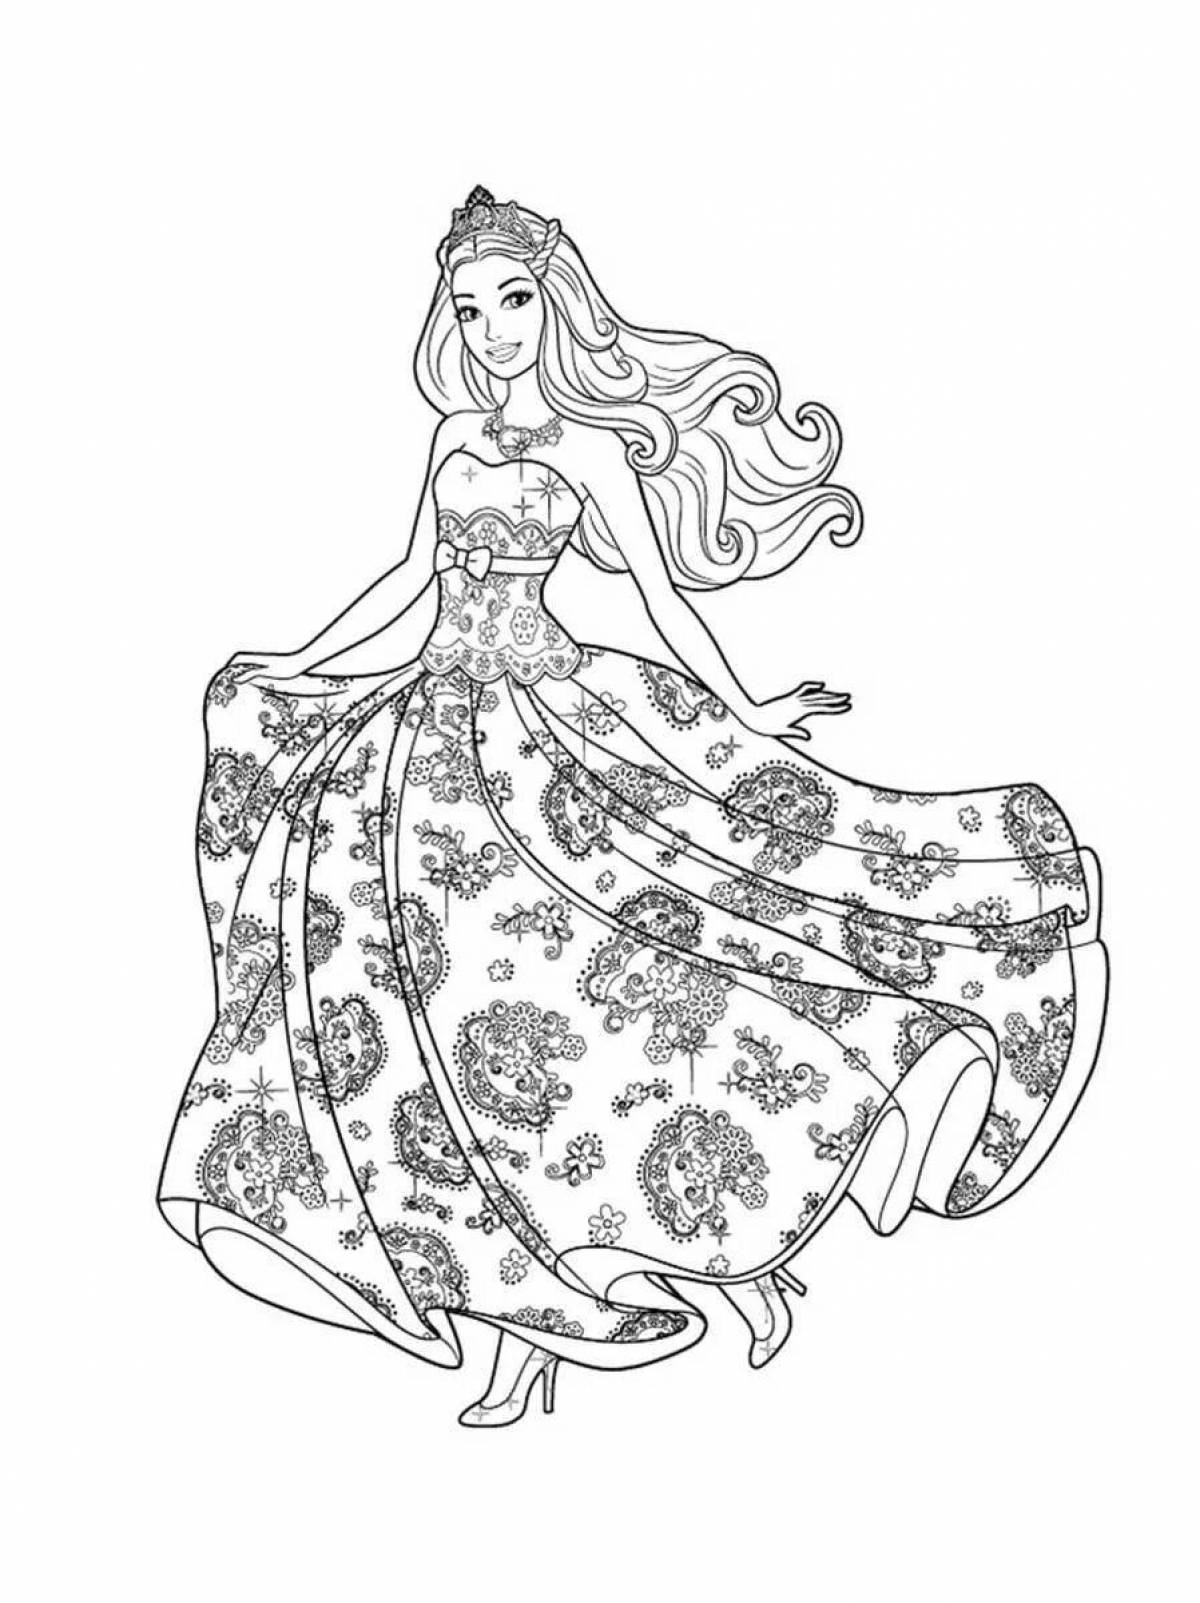 Outstanding barbie coloring in a dress